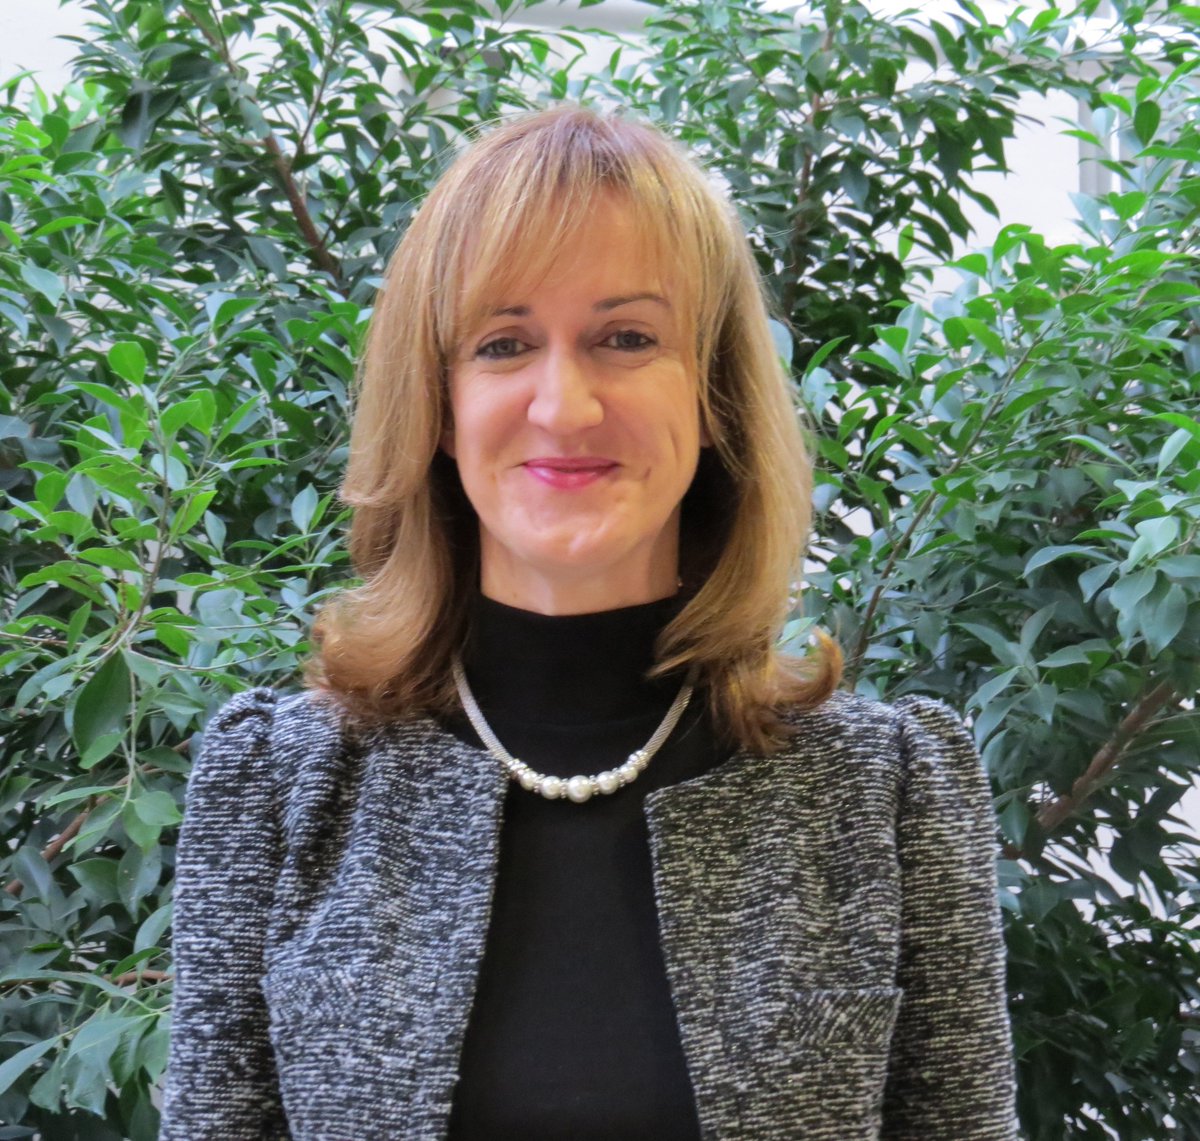 Congratulations to our colleague Prof. Lorraine O'Driscoll @lodrisc1 who was recently appointed research lead at Trinity St. James' Cancer Institute @stjamesdublin, leading the advancement of research programmes at TSJCI
pharmacy.tcd.ie/news/Research_…